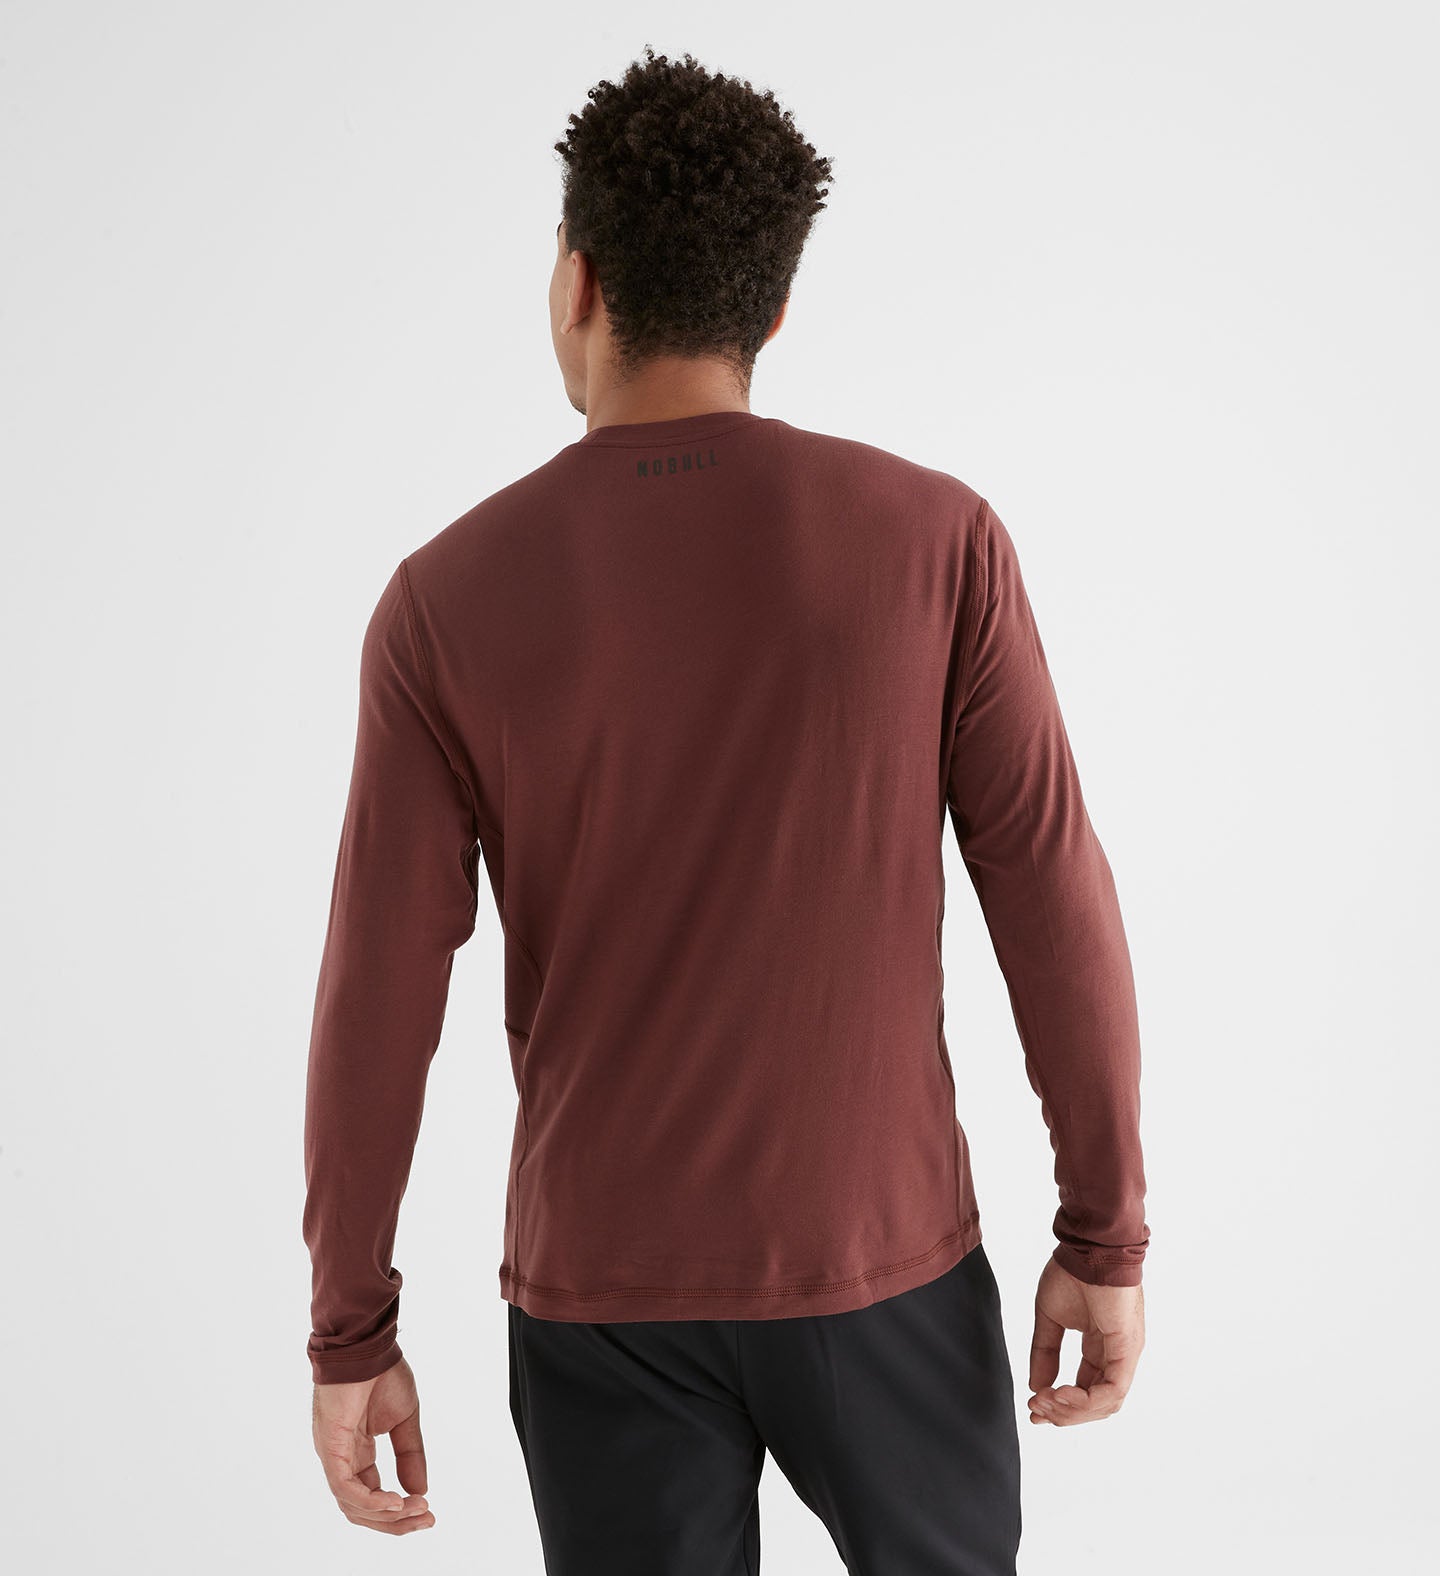 Coldpruf Merino Wool Blend Red Union Long Johns for Men